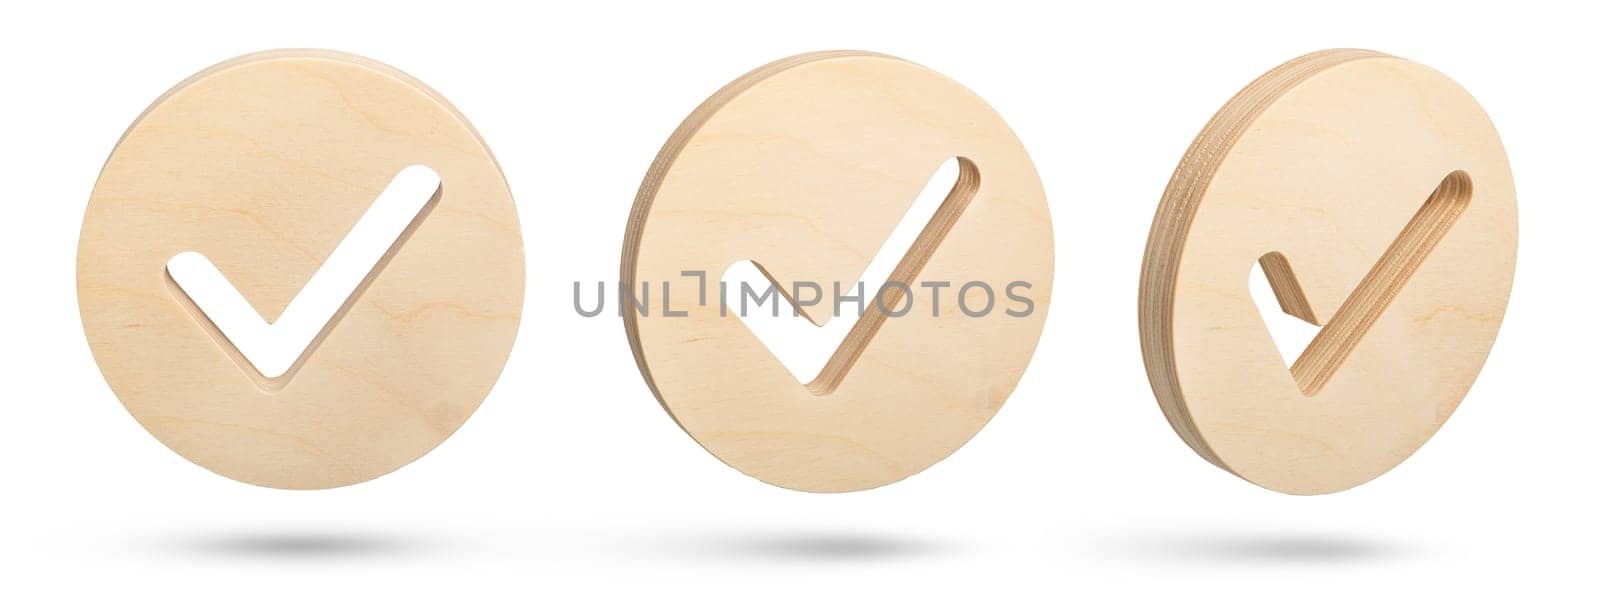 Set of check mark symbols from different sides on a white isolated background. A large wooden round check mark sign is falling down casting a shadow. High quality photo for a design or project. by SERSOL